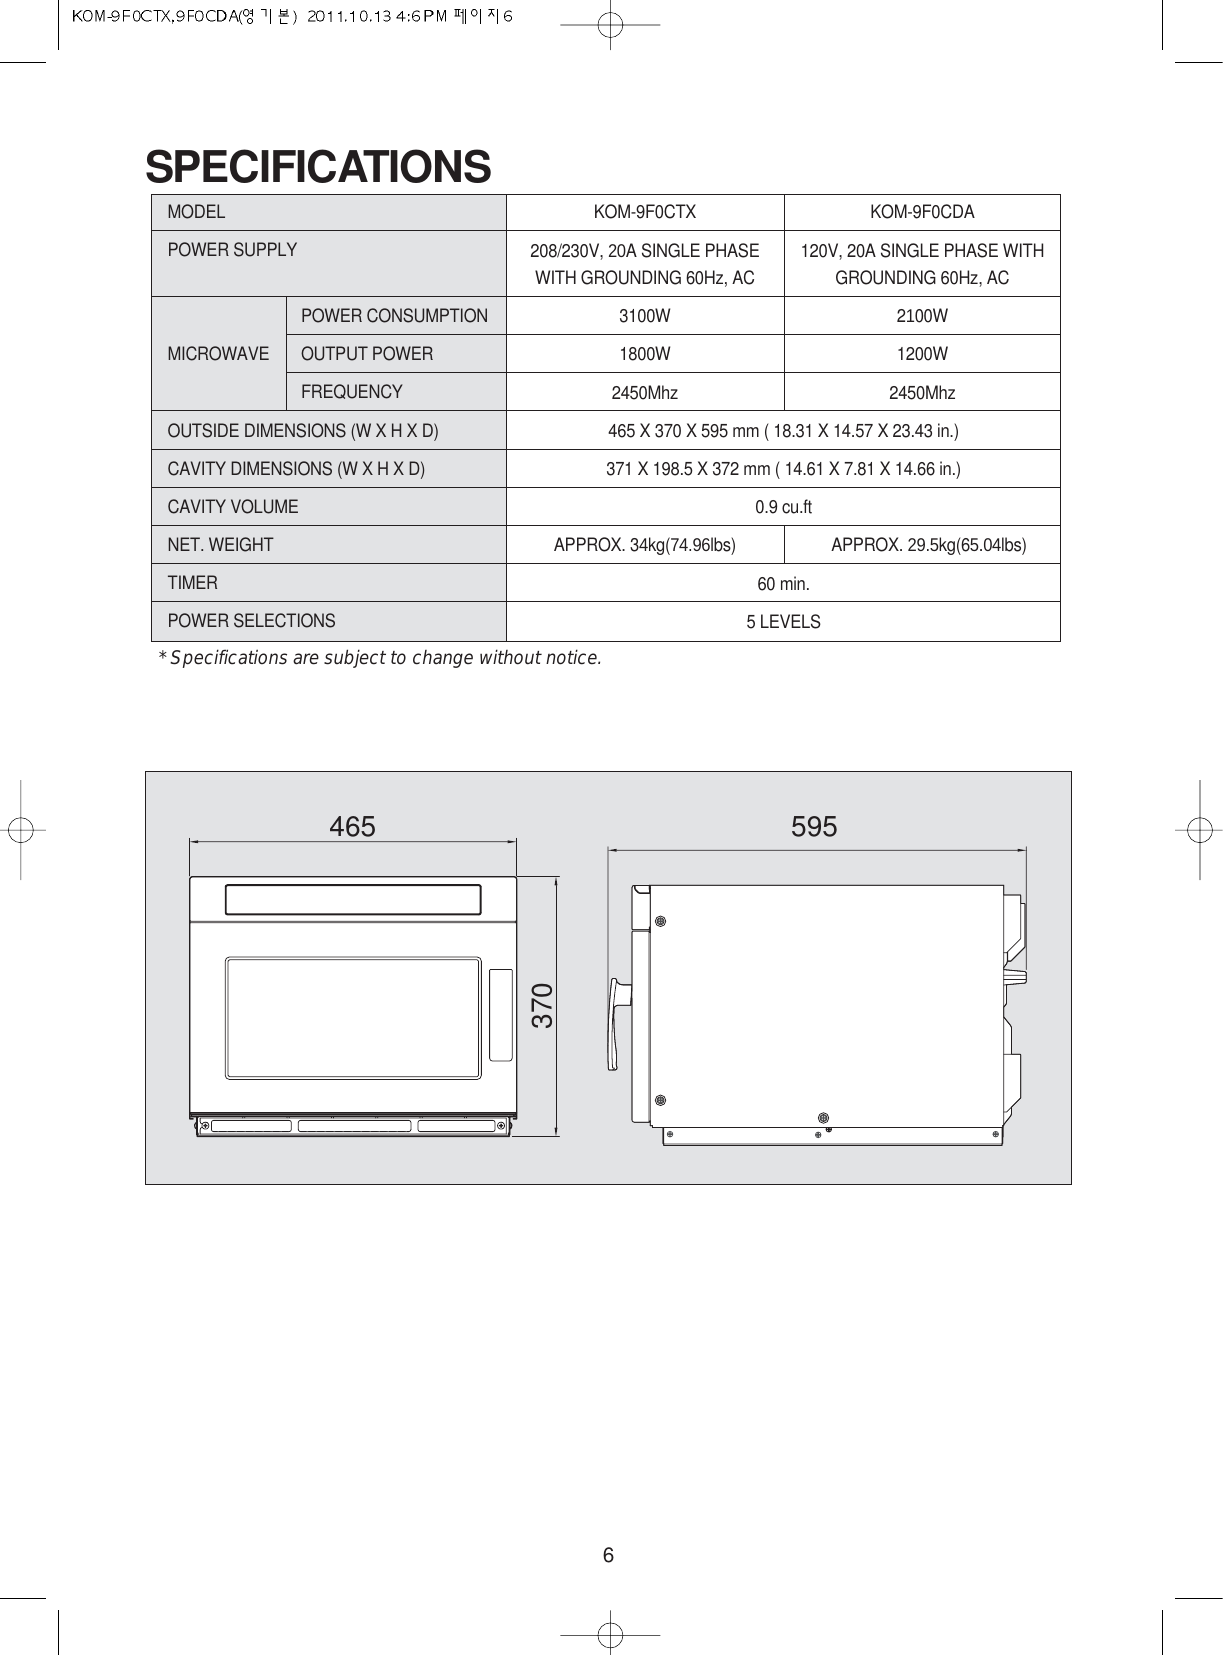 6SPECIFICATIONS* Specifications are subject to change without notice.465 595370MODELPOWER SUPPLYPOWER CONSUMPTIONMICROWAVE OUTPUT POWERFREQUENCYOUTSIDE DIMENSIONS (W X H X D)CAVITY DIMENSIONS (W X H X D)CAVITY VOLUMENET. WEIGHTTIMERPOWER SELECTIONS465 X 370 X 595 mm ( 18.31 X 14.57 X 23.43 in.)371 X 198.5 X 372 mm ( 14.61 X 7.81 X 14.66 in.)0.9 cu.ft60 min.5 LEVELSKOM-9F0CTX208/230V, 20A SINGLE PHASEWITH GROUNDING 60Hz, AC3100W1800W2450MhzAPPROX. 34kg(74.96lbs)KOM-9F0CDA120V, 20A SINGLE PHASE WITHGROUNDING 60Hz, AC2100W1200W2450MhzAPPROX. 29.5kg(65.04lbs)